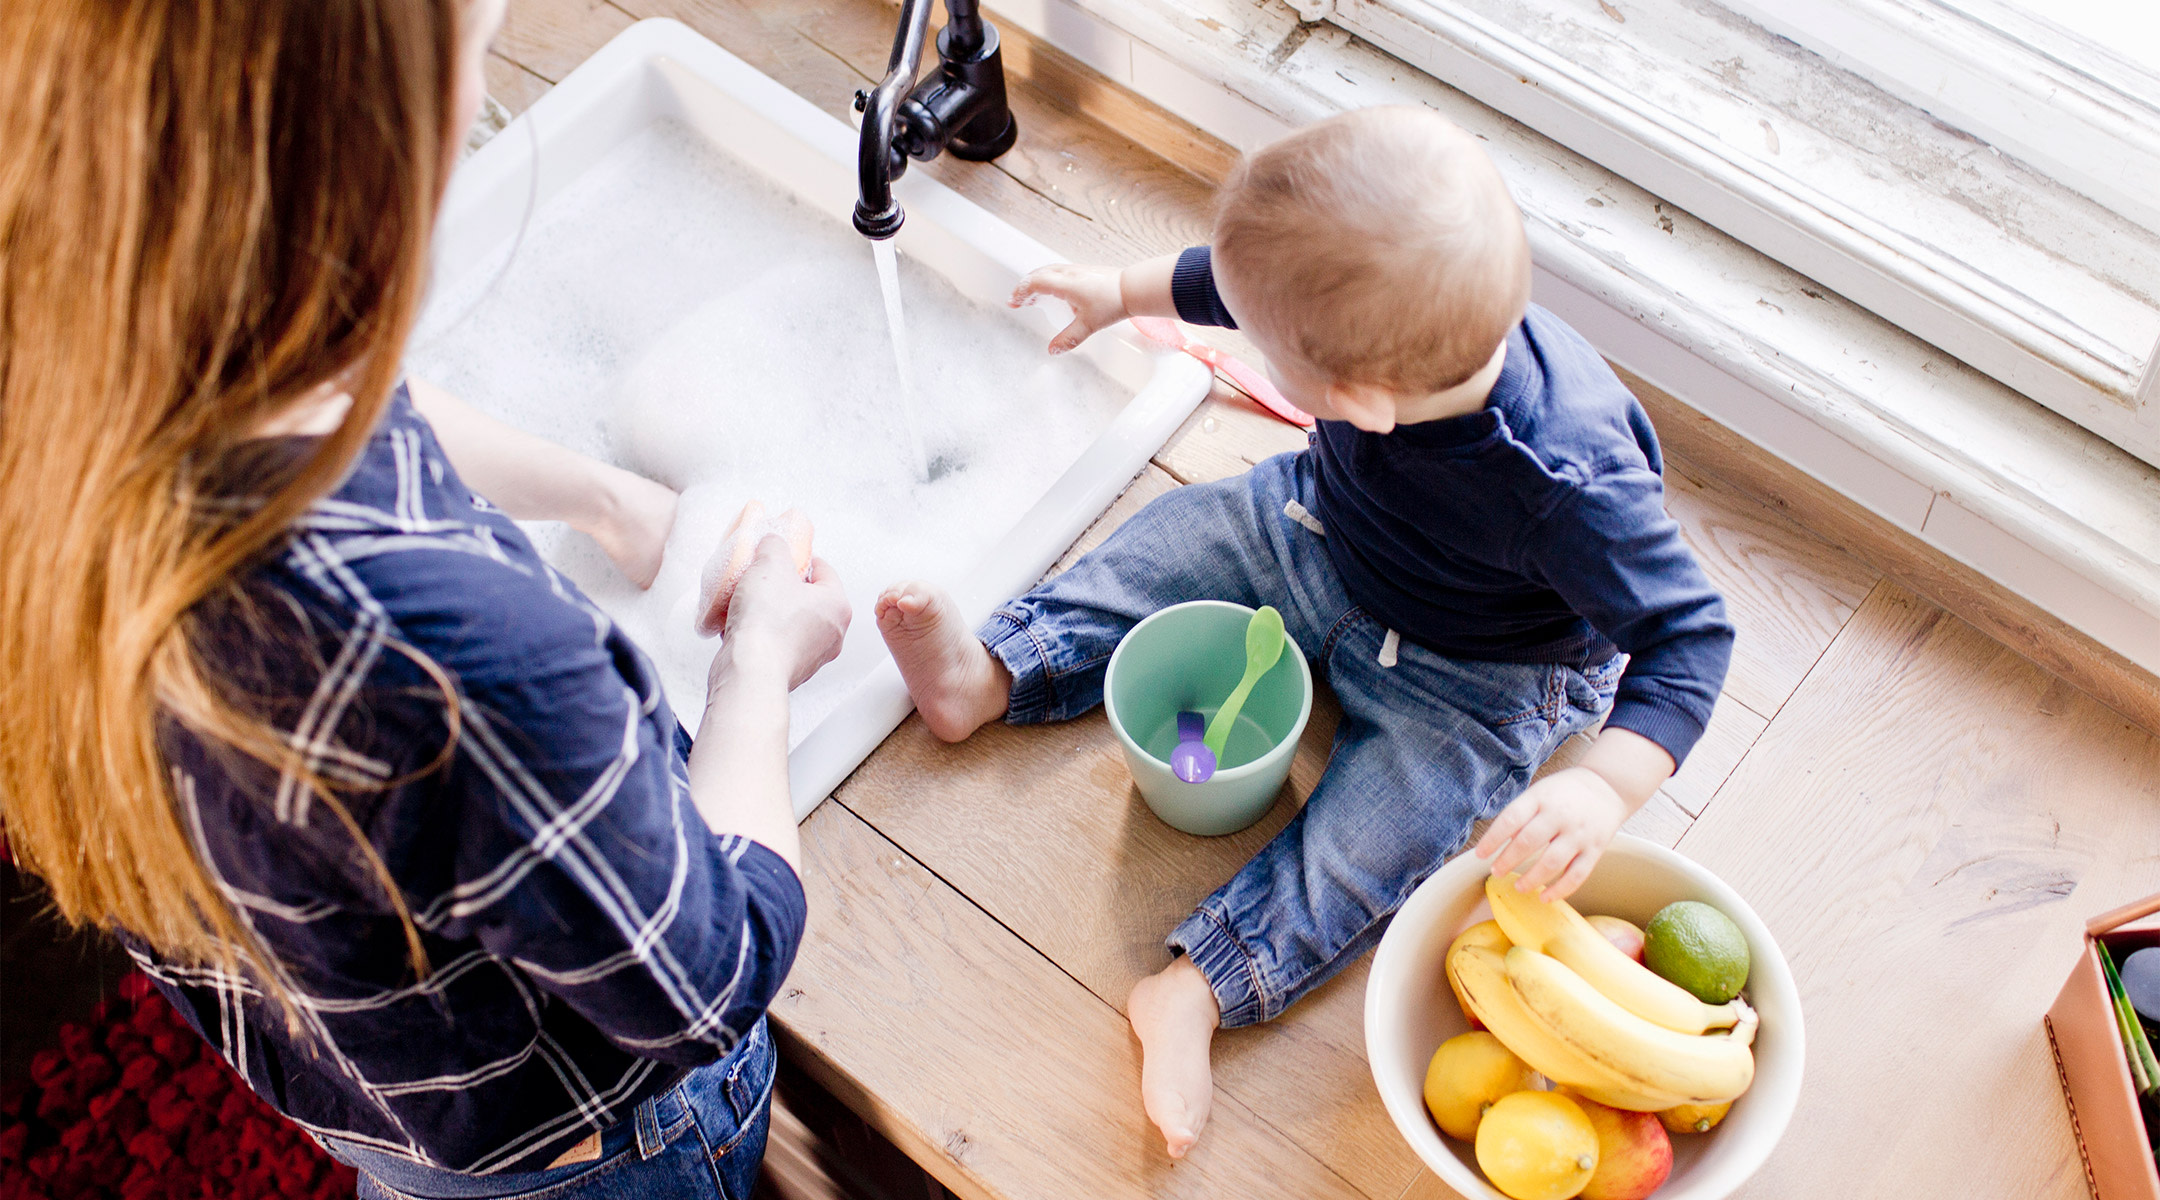 Mom doing dishes in the sink with baby sitting nearby